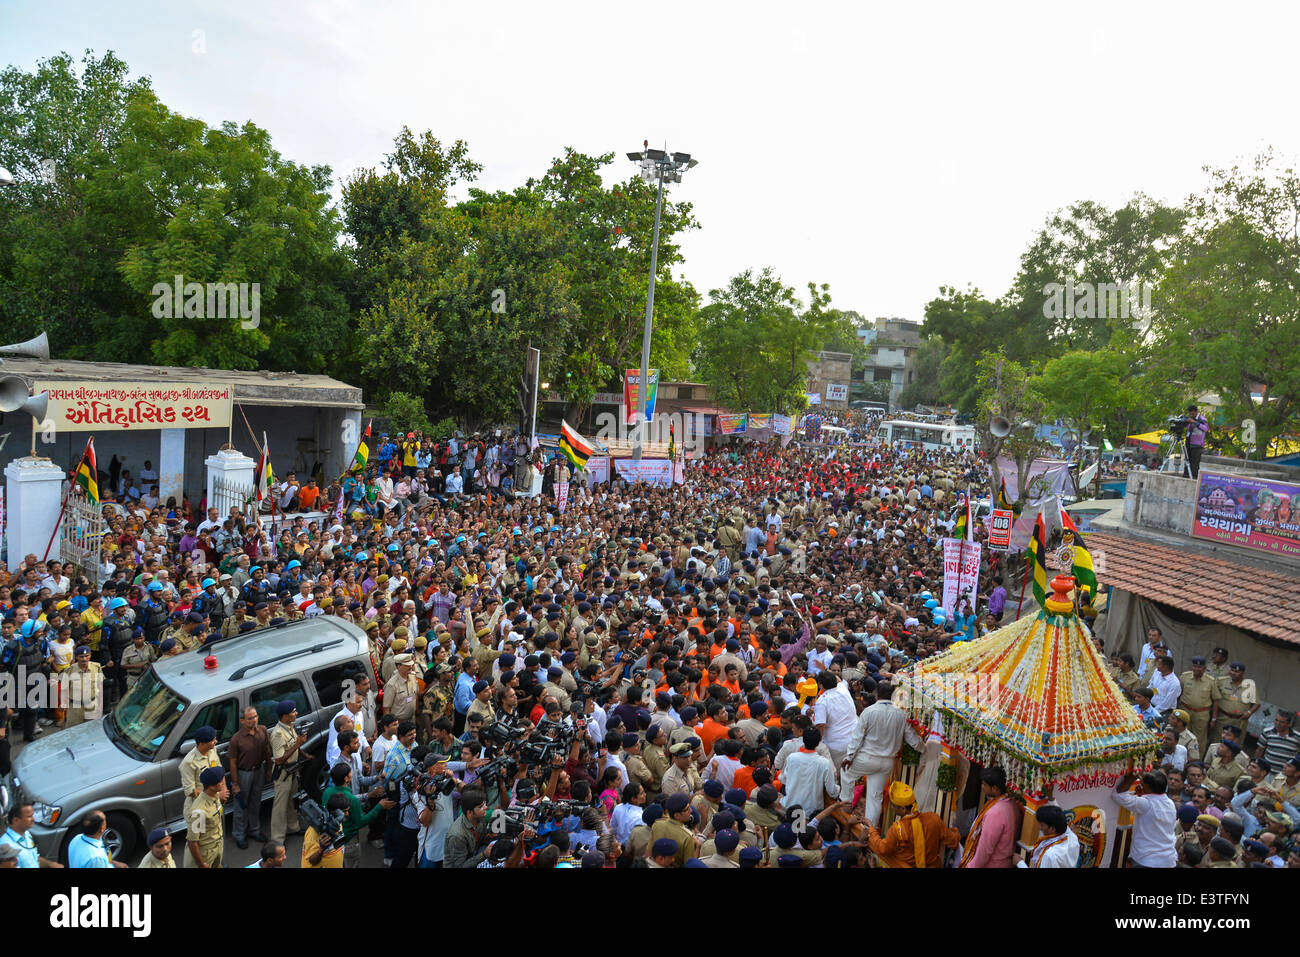 Ahmedabad, Gujarat, India, 29th June, 2014. Ahmedabad, Gujarat, India, 29th June, 2014. Lord Jagannath's 137th Rath Yatra begins in Ahmedabad, Rath Yatra or chariot festival is celebrated by Hindus on the second day of Sukla Paksha in the month of Ashadh. © Nisarg Lakhmani/Alamy Live News Credit:  Nisarg Lakhmani/Alamy Live News Stock Photo